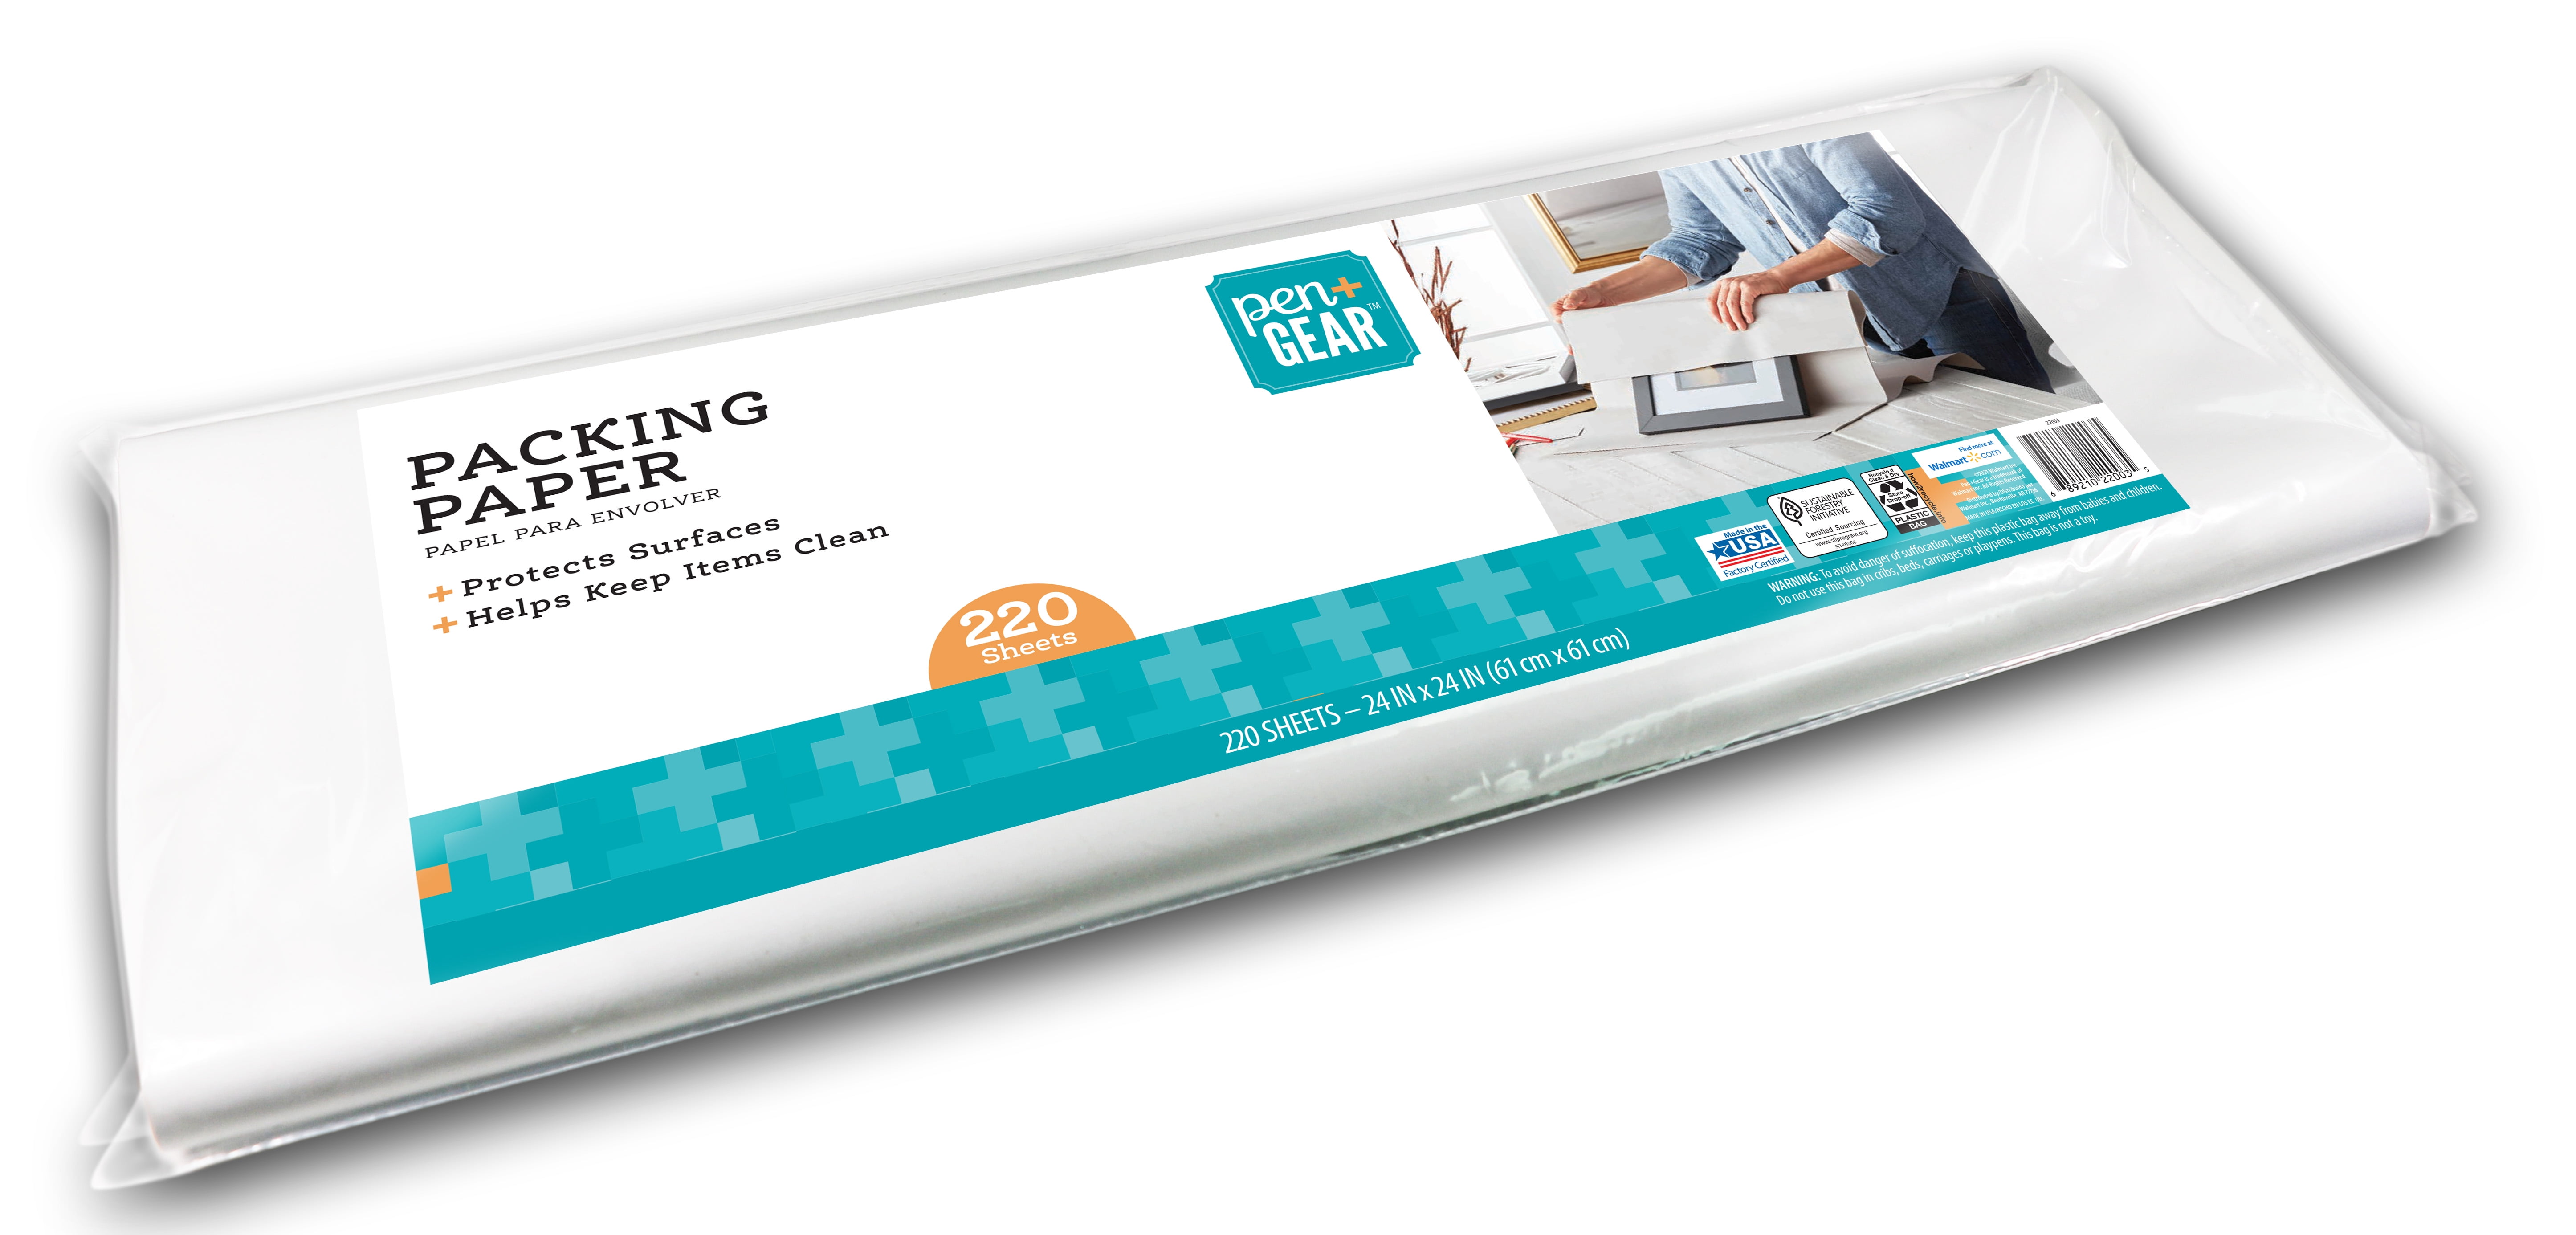 Pen+Gear 24 in. x 24 in. White Packing Paper for Moving & Shipping, 220 Sheets